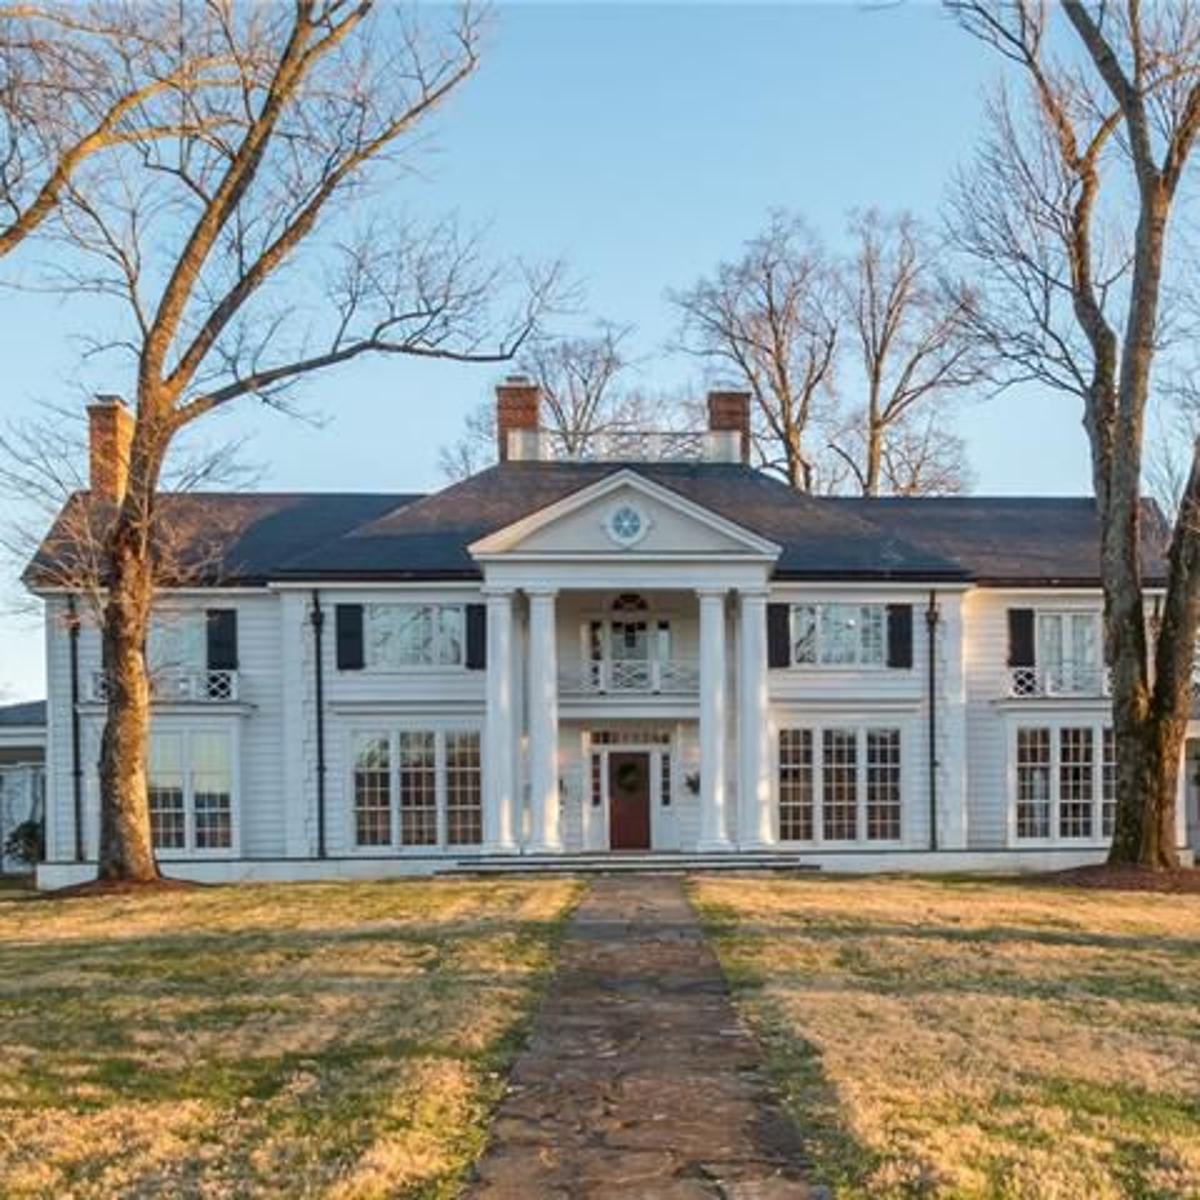 30 Multimillion Dollar Mansions And Estates For Sale In Central